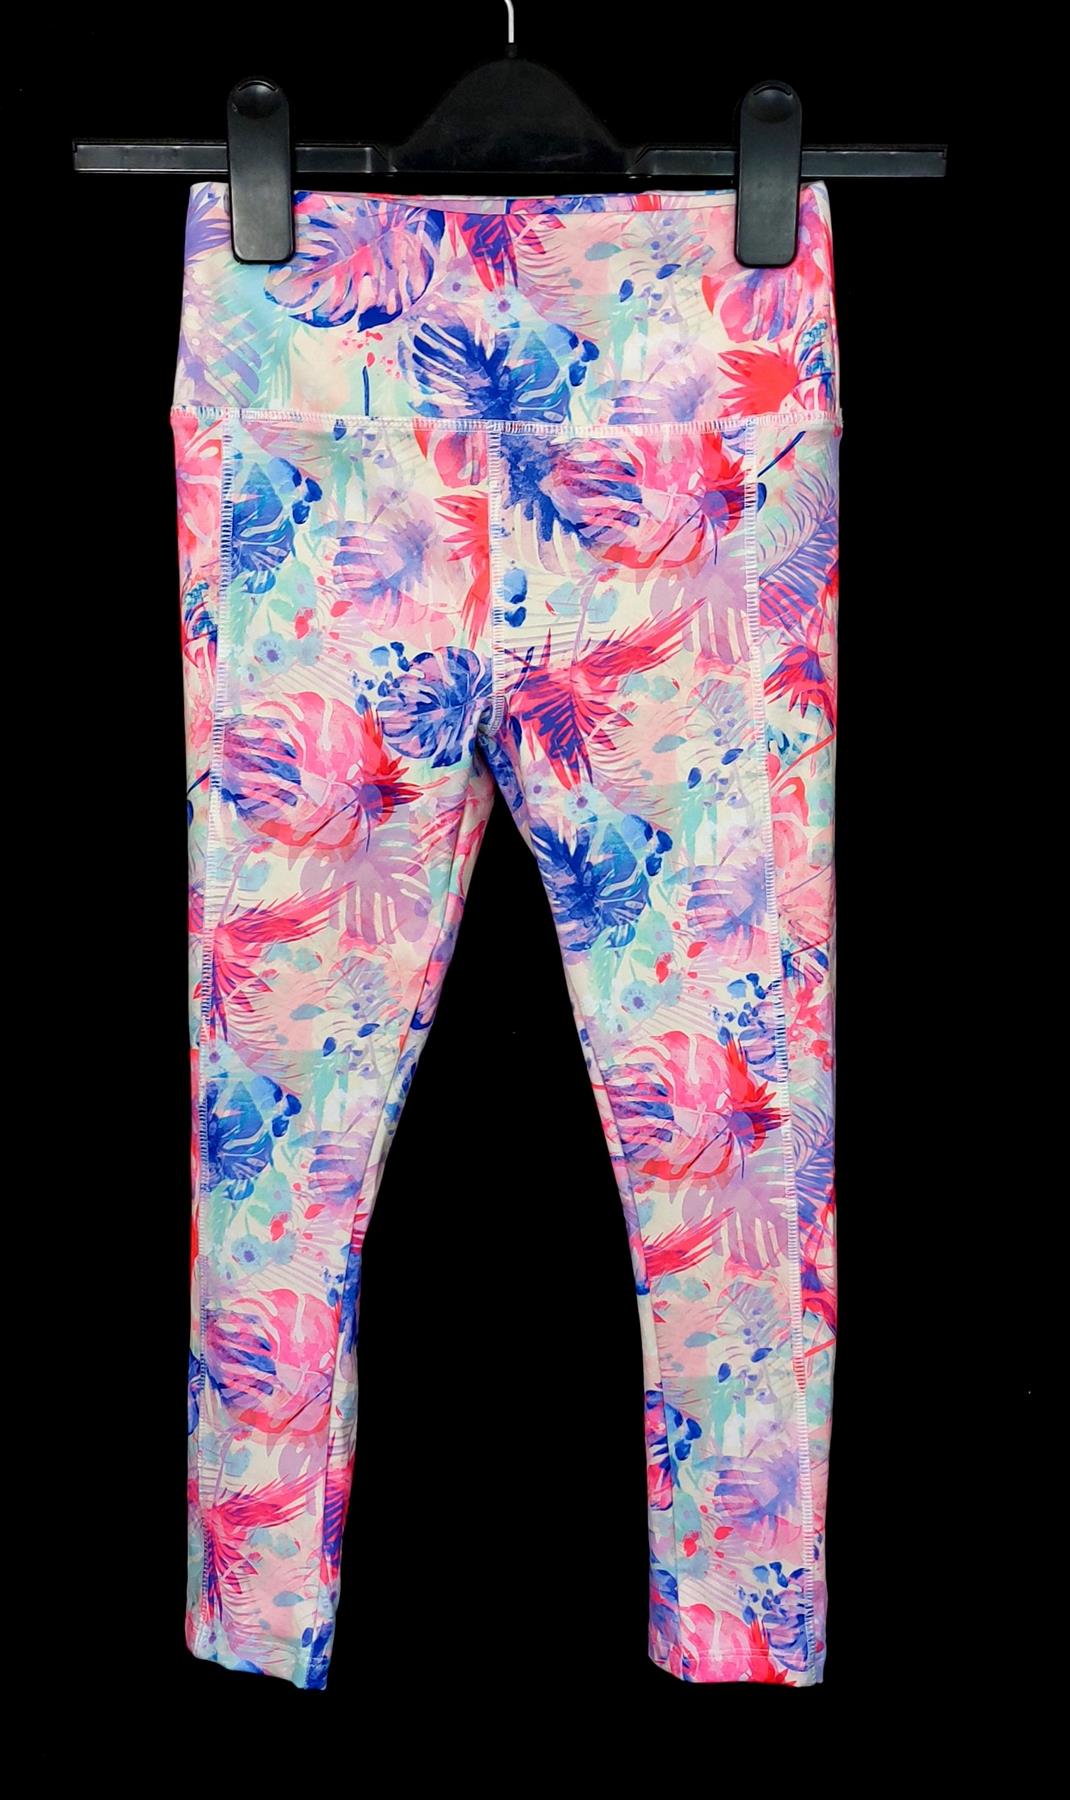 Girls' Sport Leggings Stretch Joggers Pink Tropical Chainstore Brand New